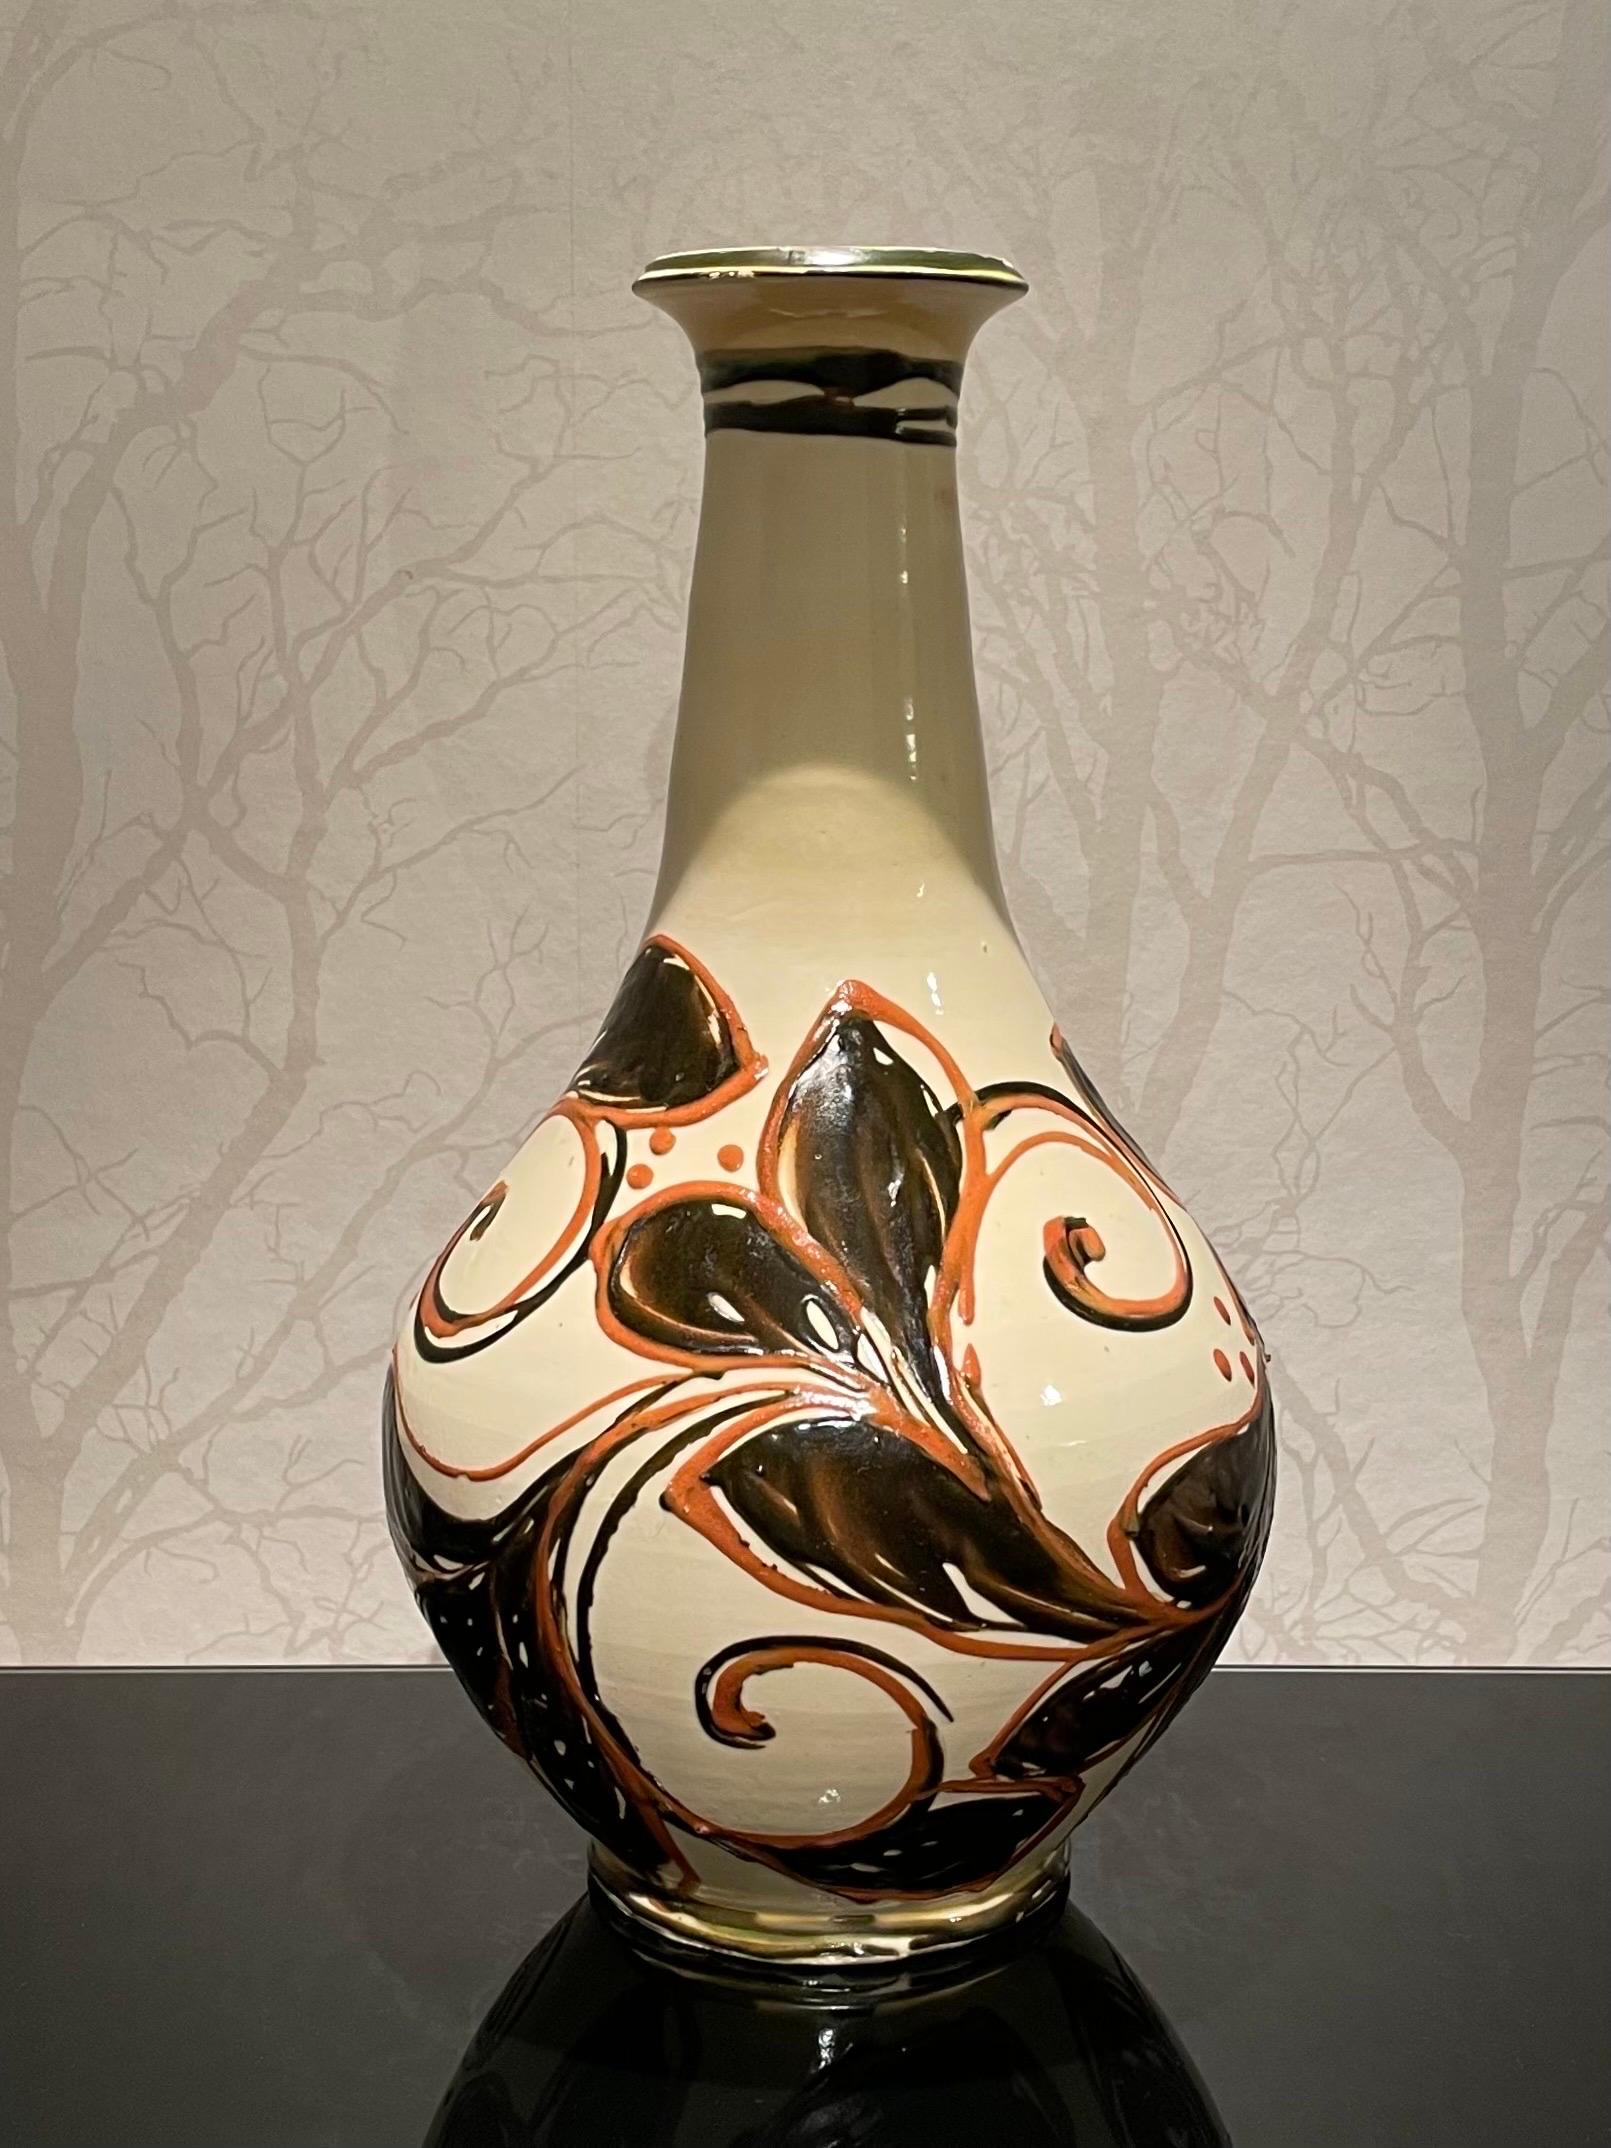 This is the 1920s Danish 46 cm tall ceramic floor vase by Herman Kähler.

It comes with a globular body with tall tapering neck, high glossy surface and a clear red and very deep blue, nearly black color, on a bright cream white base.
The vase has a